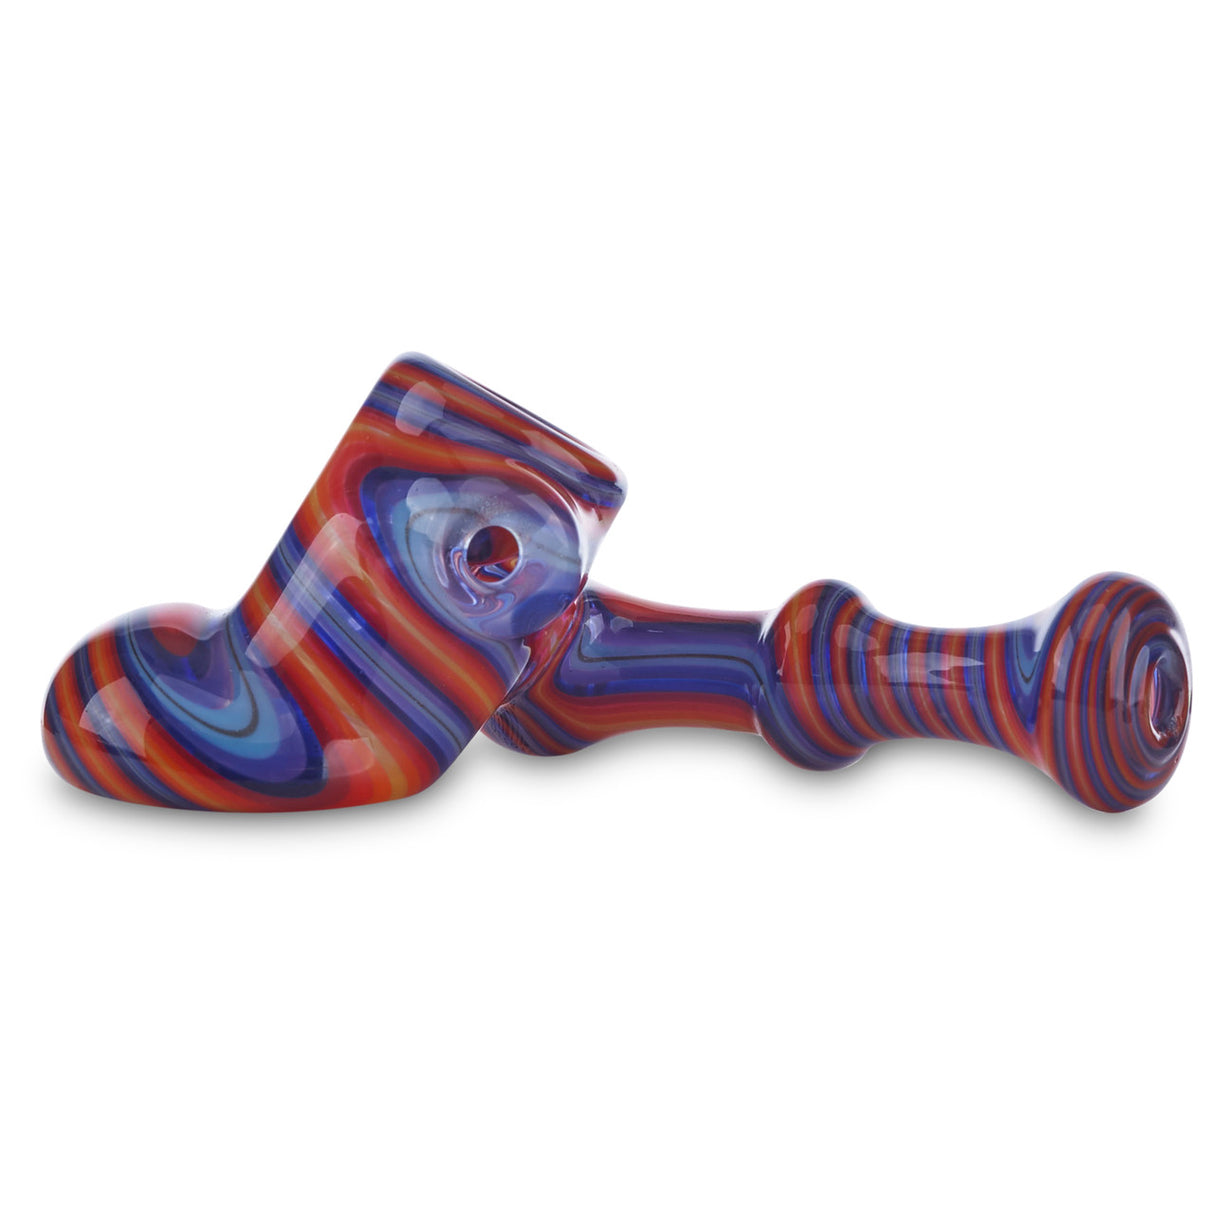 andy g mini sherlock for sale online at cloud 9 smoke co